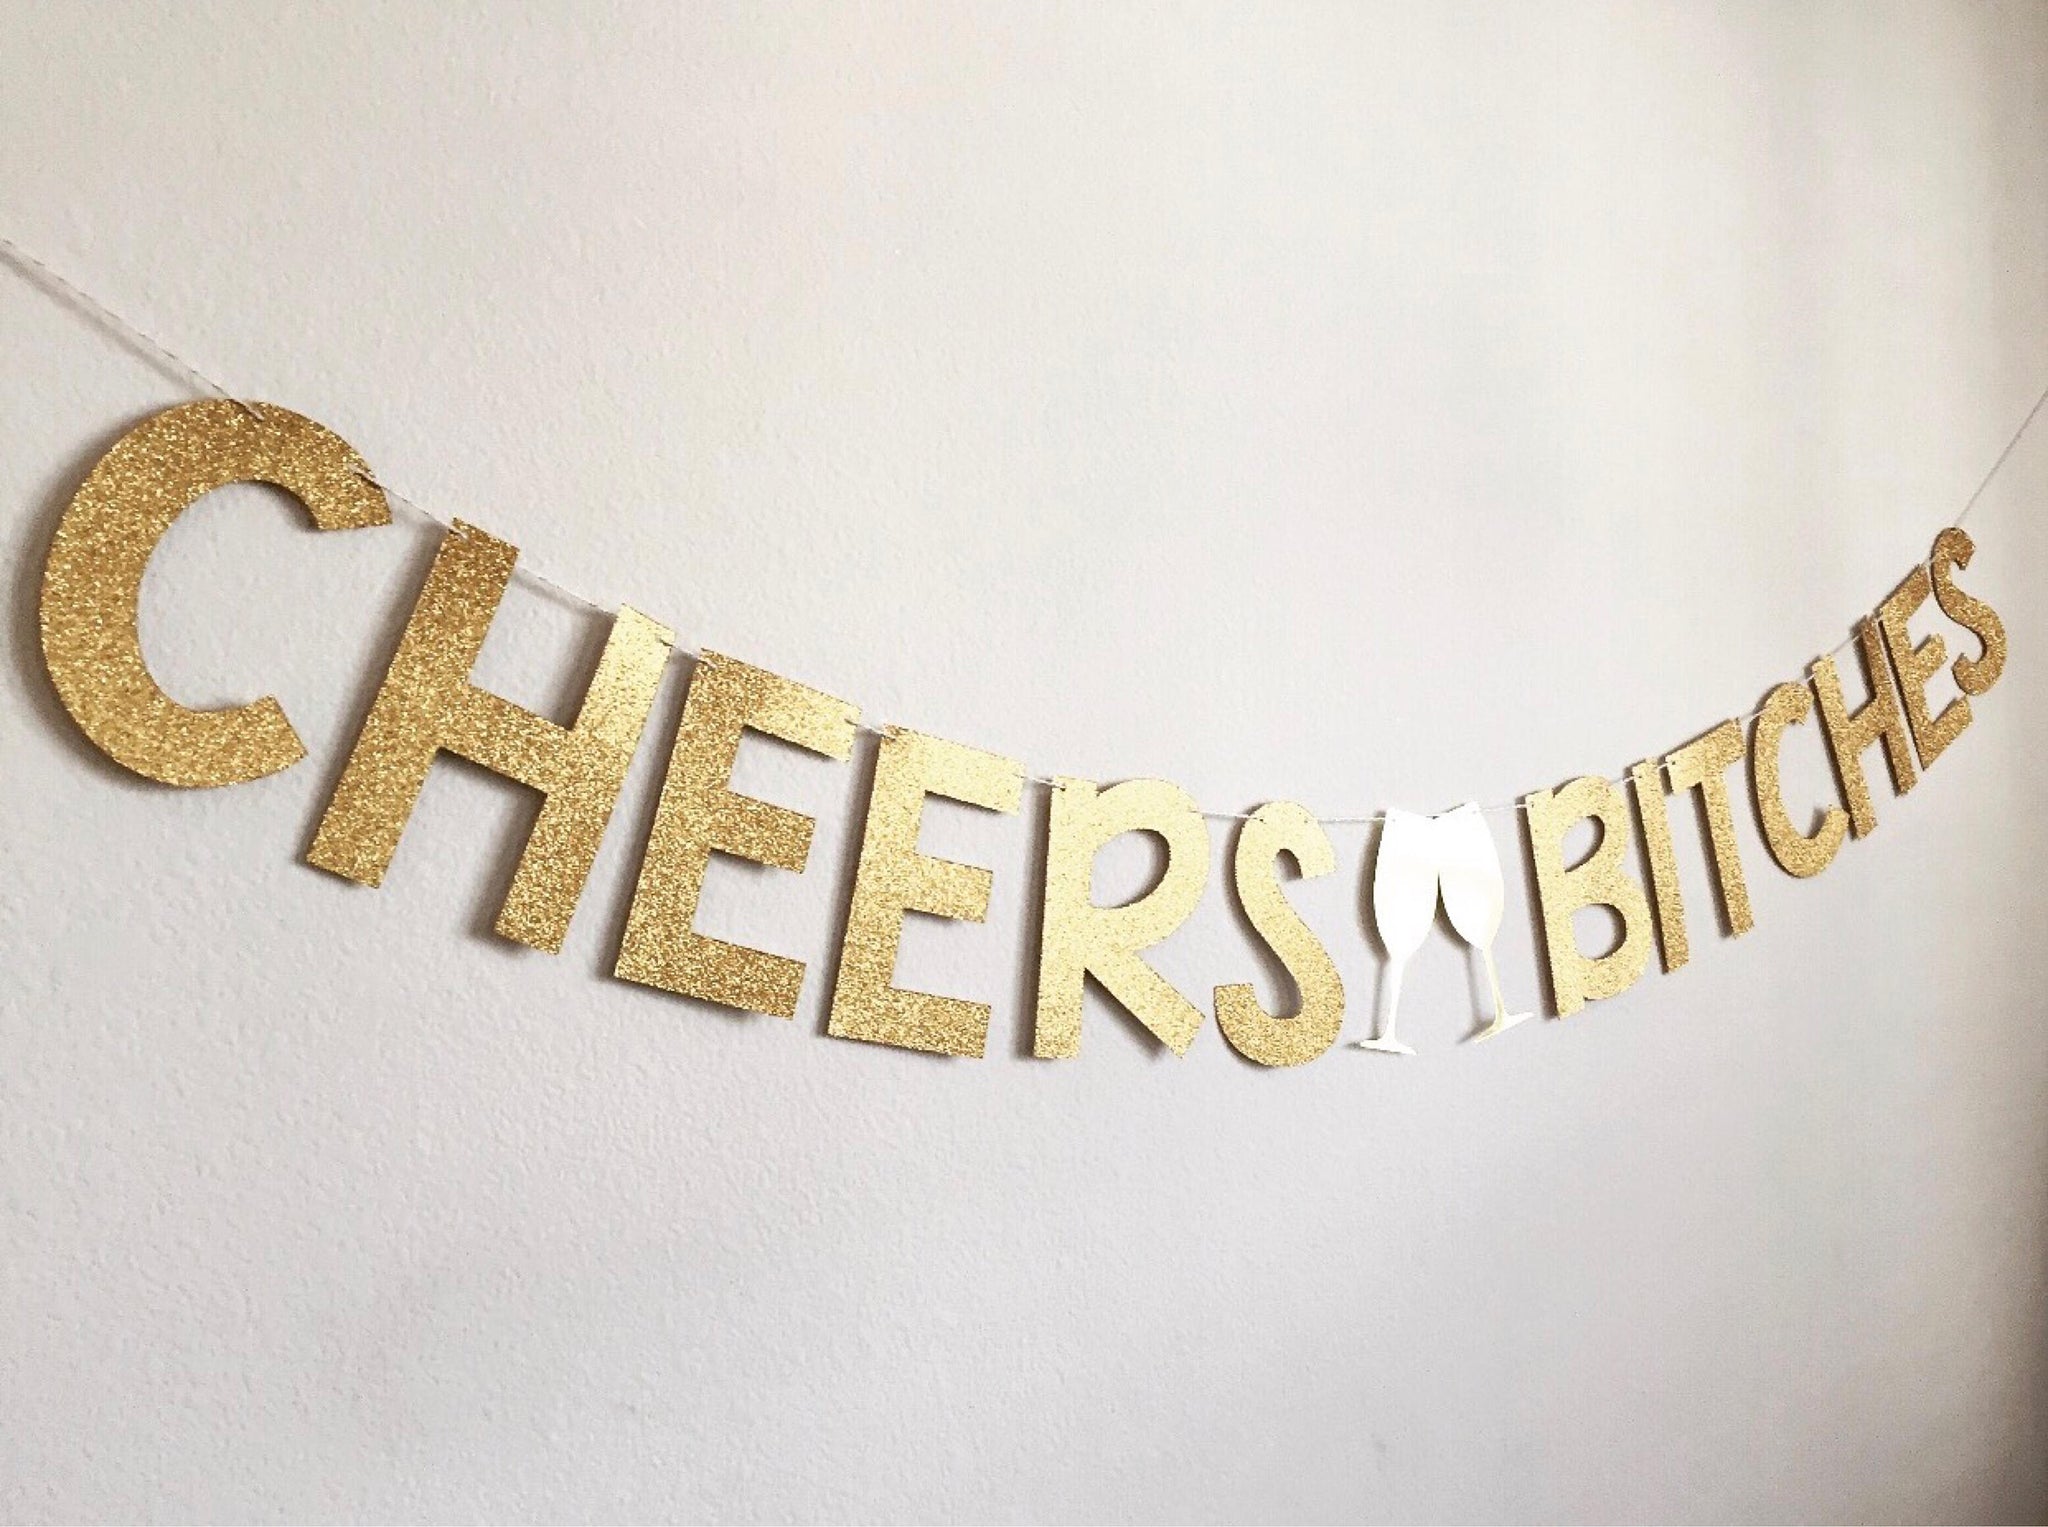 Cheers Bitches Banner, Bachelorette Party Banner